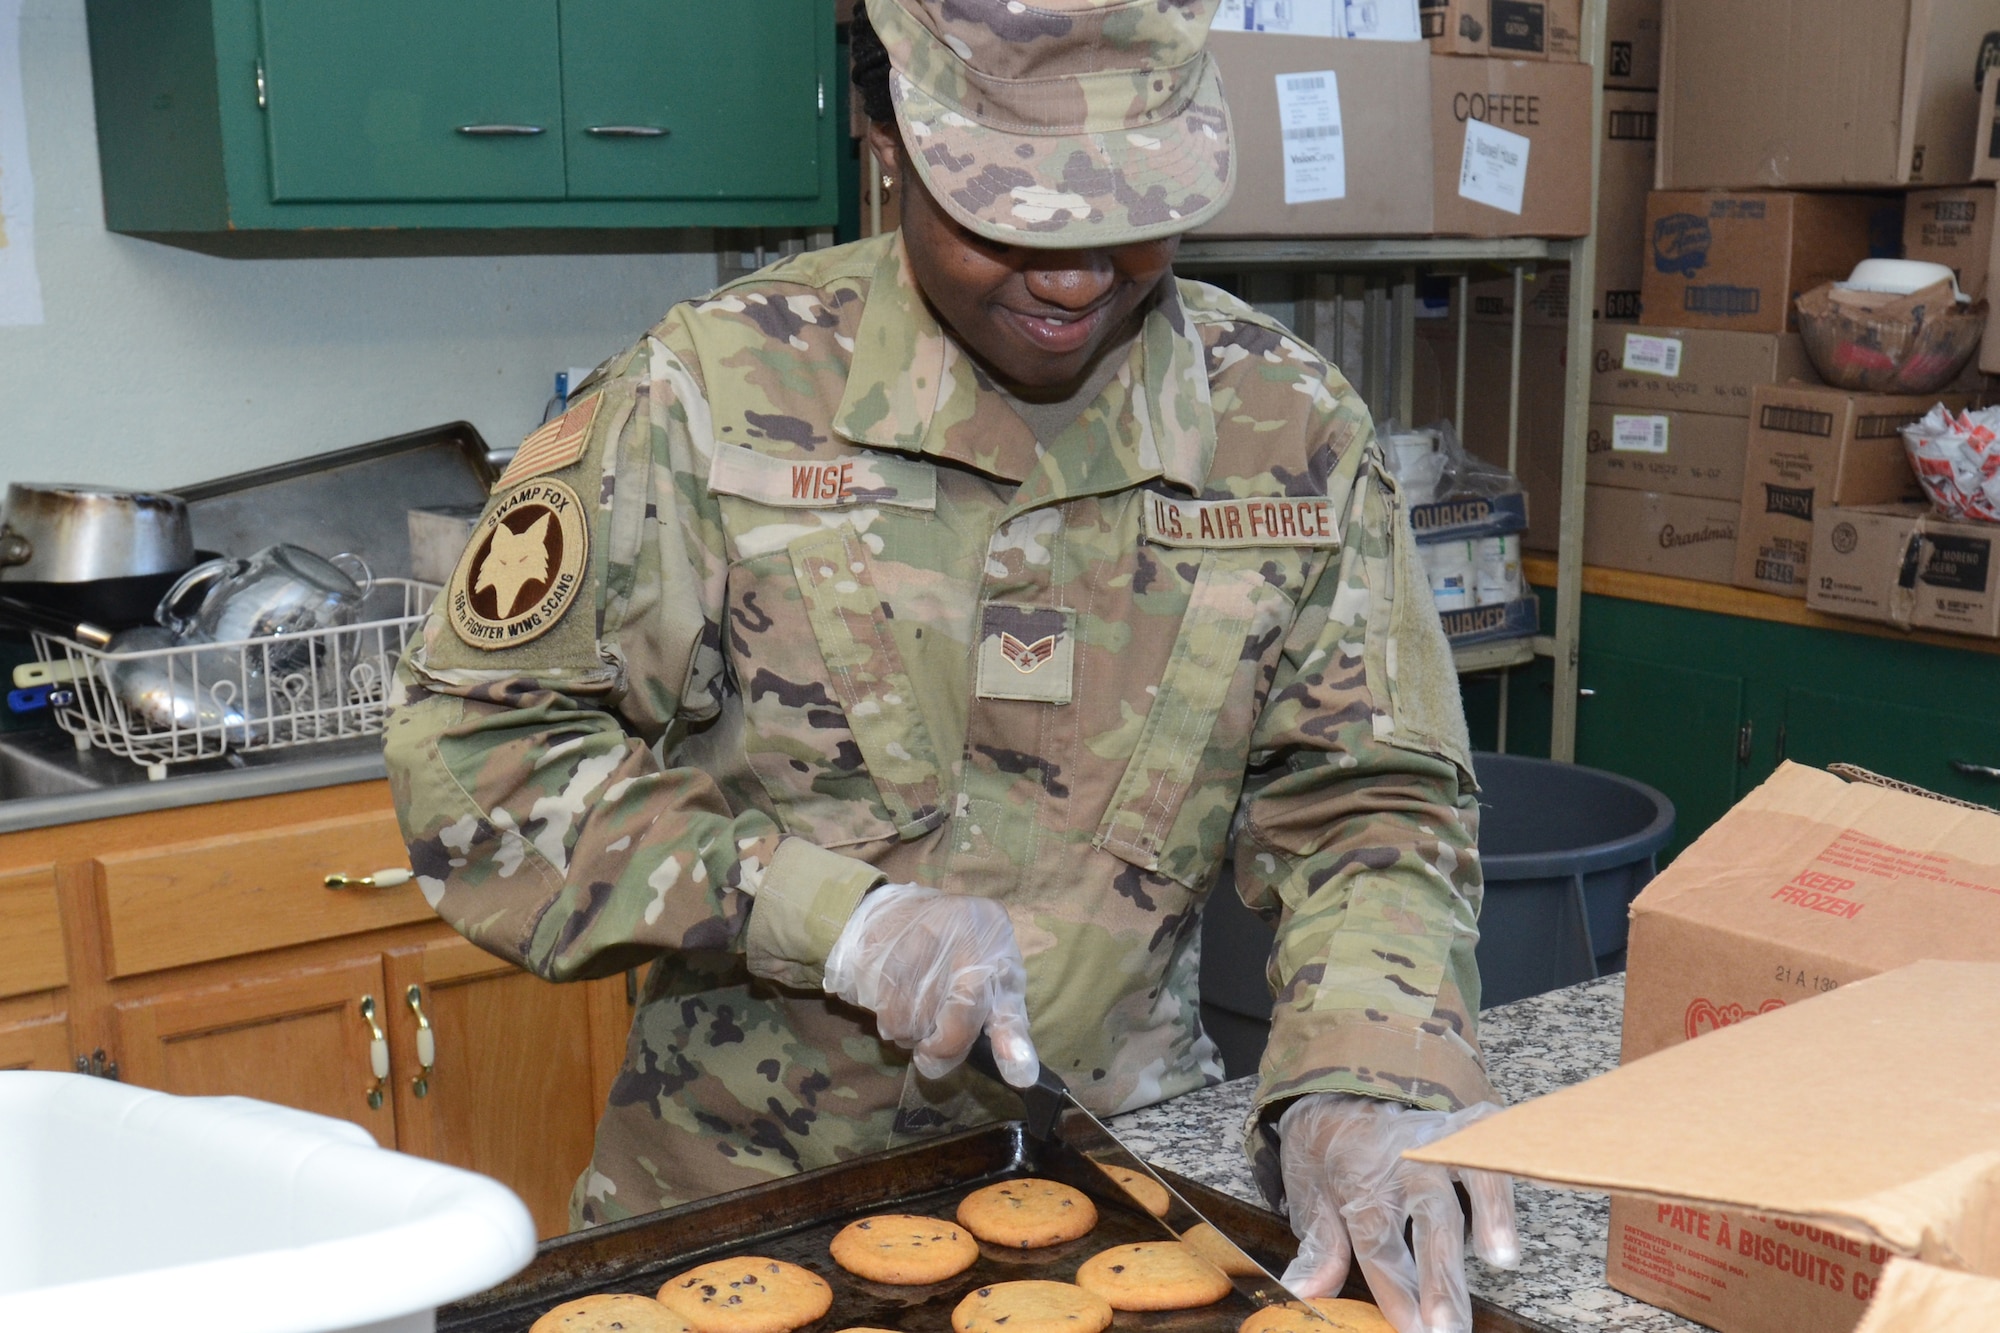 U.S. Air Force Senior Airman Nataiza, a food services specialist assigned to the 169th Fighter Wing, McEntire Joint National Guard Base, South Carolina, supports Operation Healthy Delta, a Department of Defense sponsored Innovative Readiness Training program designed to provide military training opportunities by providing key services to local citizens. Wise is preparing food for the military personnel working at Caruthersville, Missouri June 15, 2021. (U.S. Air National Guard photo by Lt. Col. Jim St.Clair, 169th Fighter Wing Public Affairs)